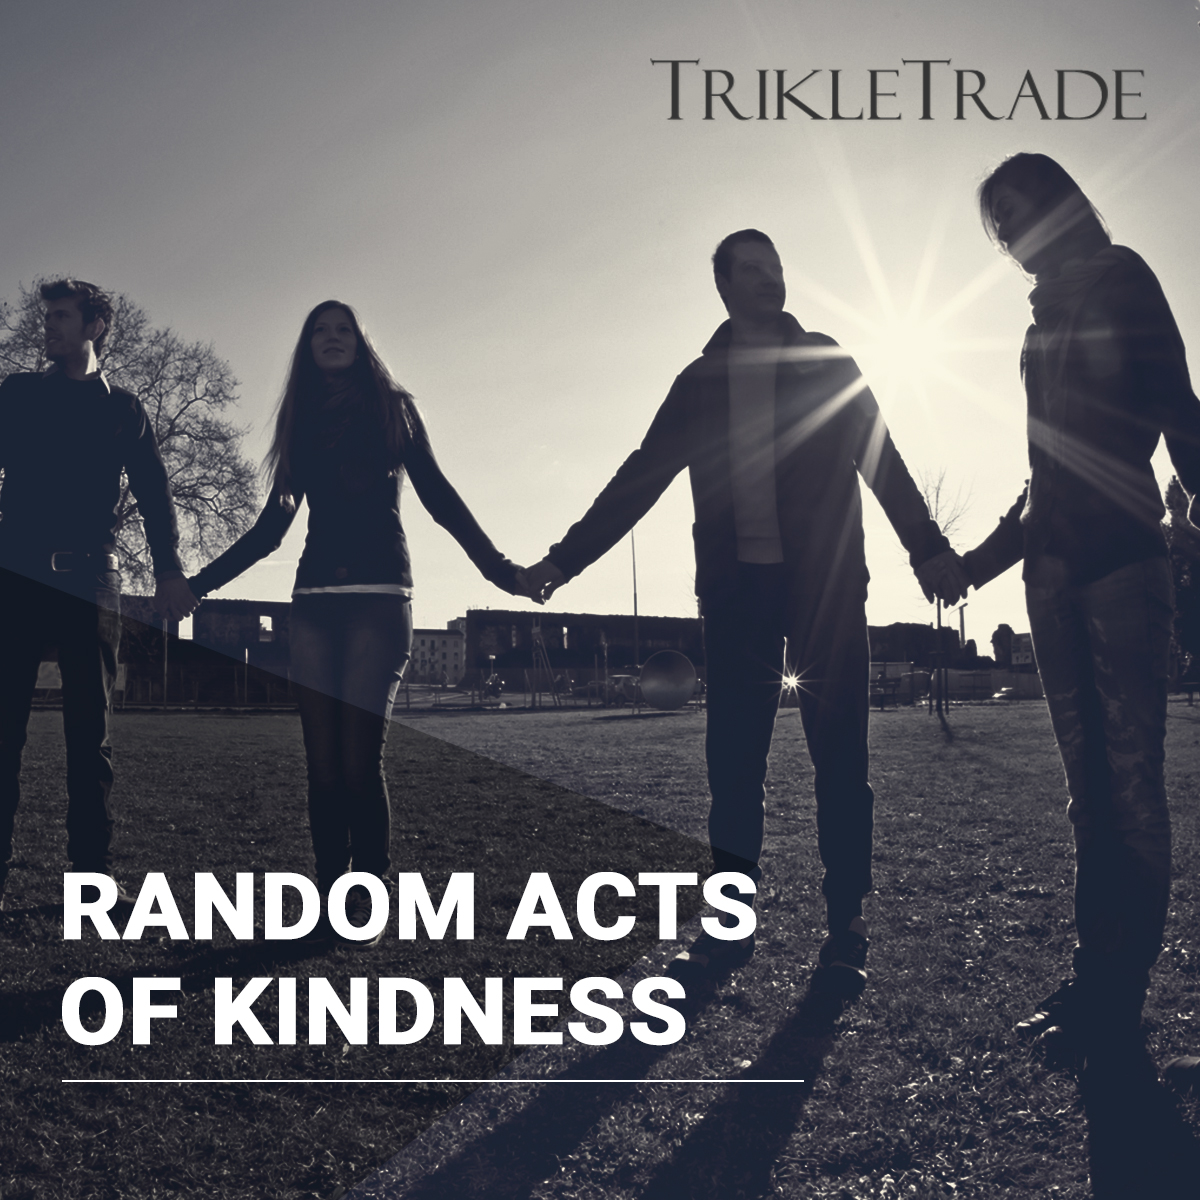 Act of Kindness in real Life. We were told about showing kindness